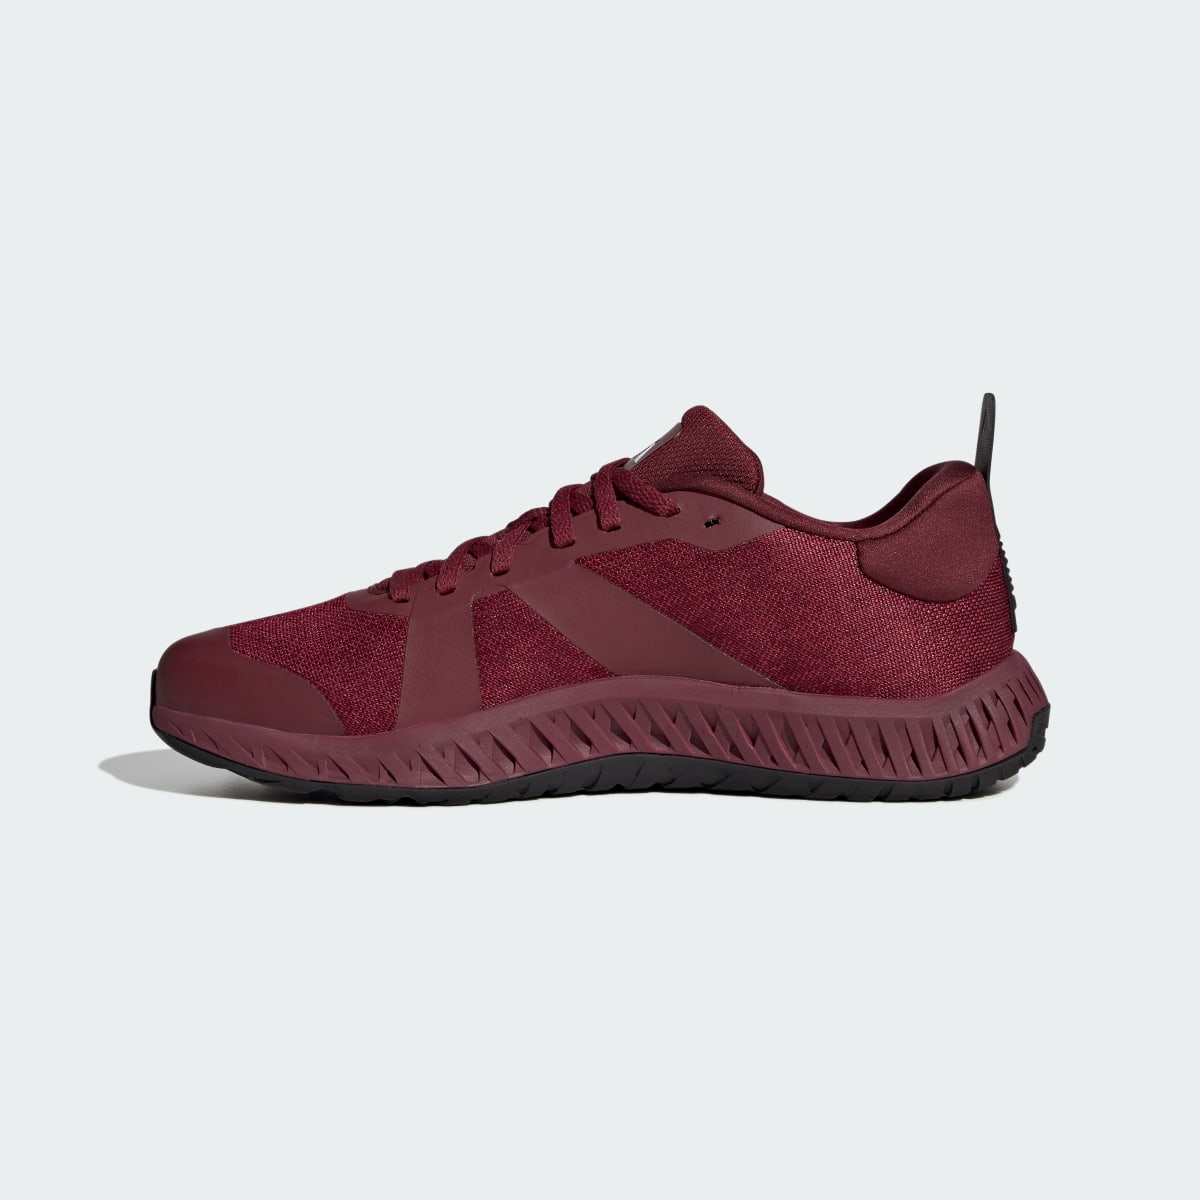 Adidas Everyset Trainer Shoes. 7